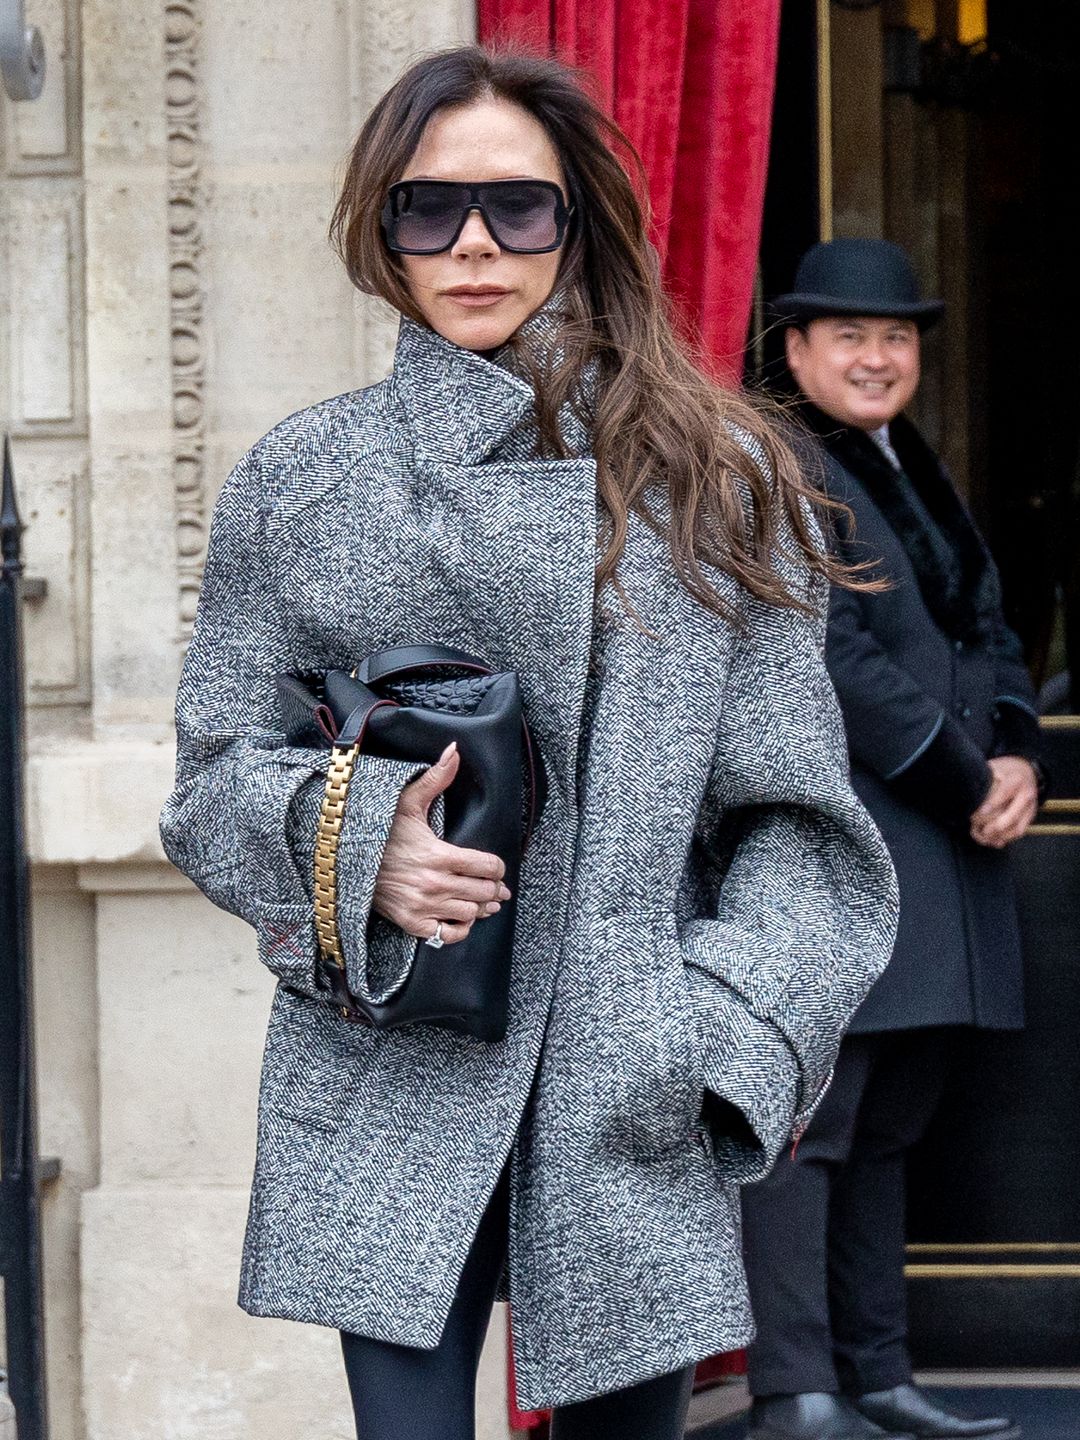 Victoria walking towards the camera in a grey coat, wearing sunglasses